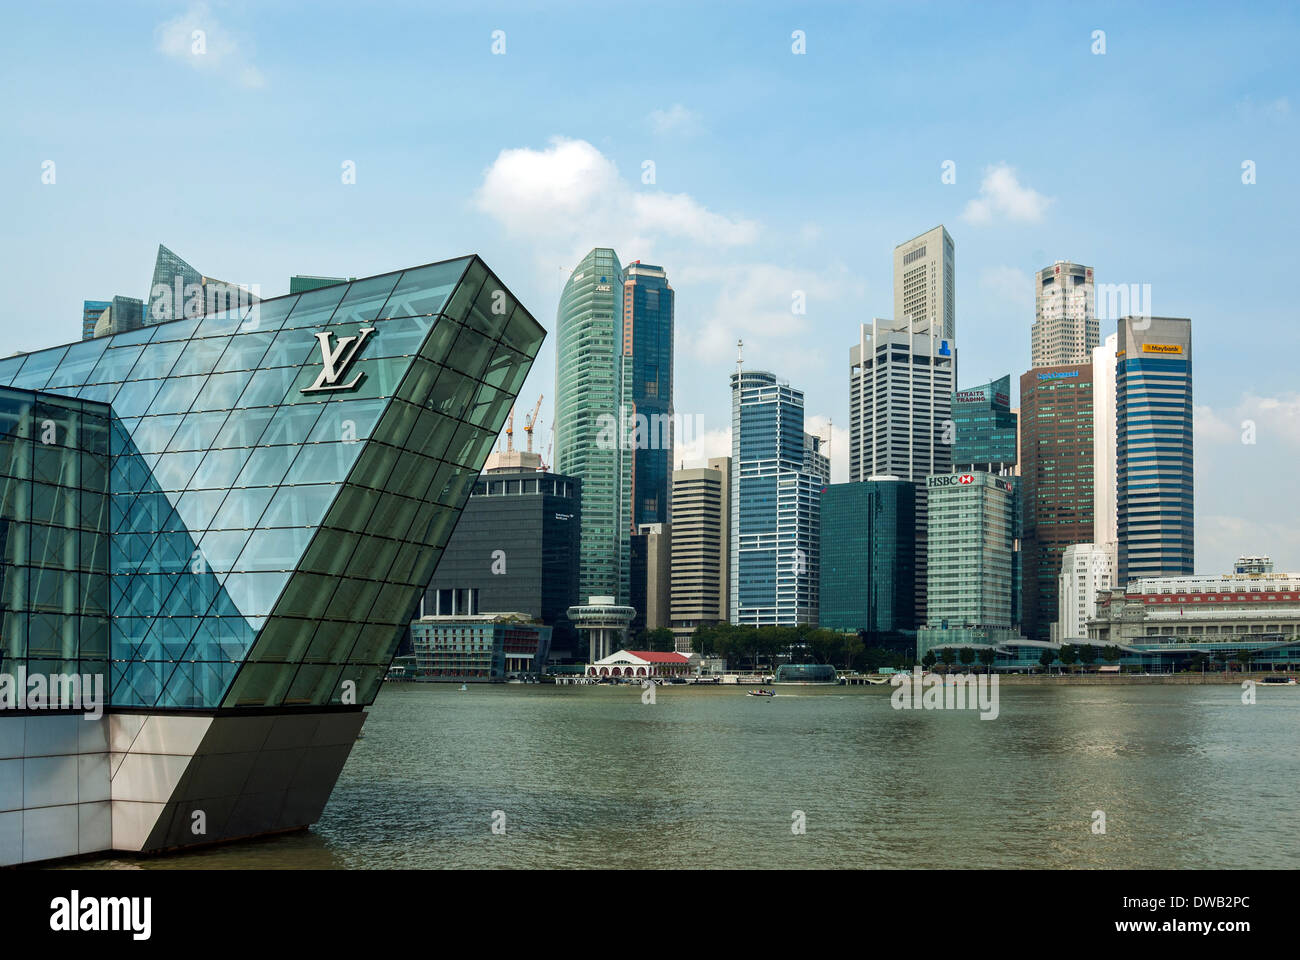 The Futuristic Building Of Louis Vuitton Shop In Marina Bay, Singapore  Stock Photo, Picture and Royalty Free Image. Image 43751826.